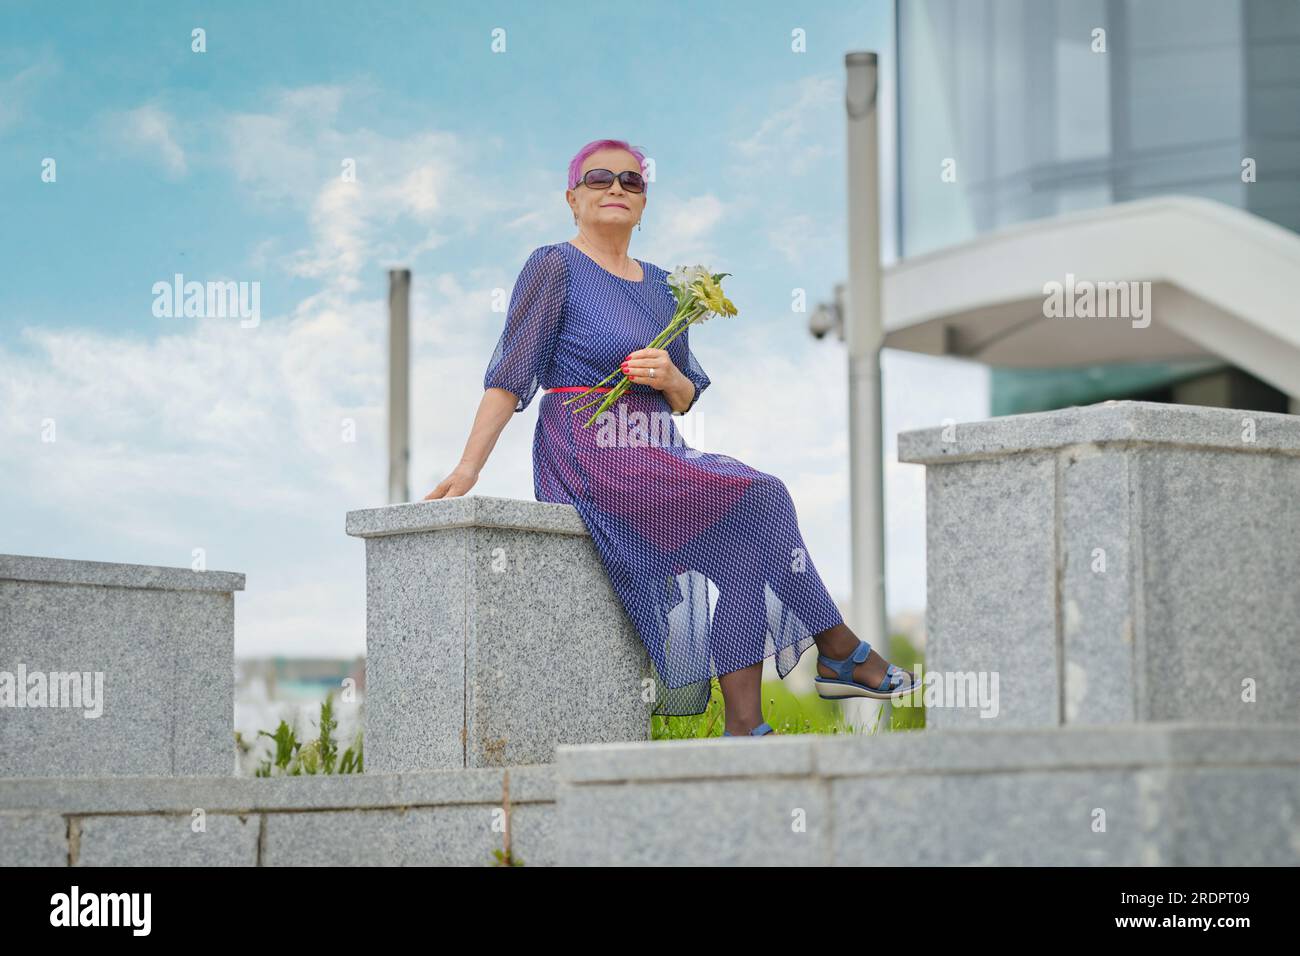 Outdoor portrait of smiling mature woman with short pink hair with spring flowers in hands Stock Photo